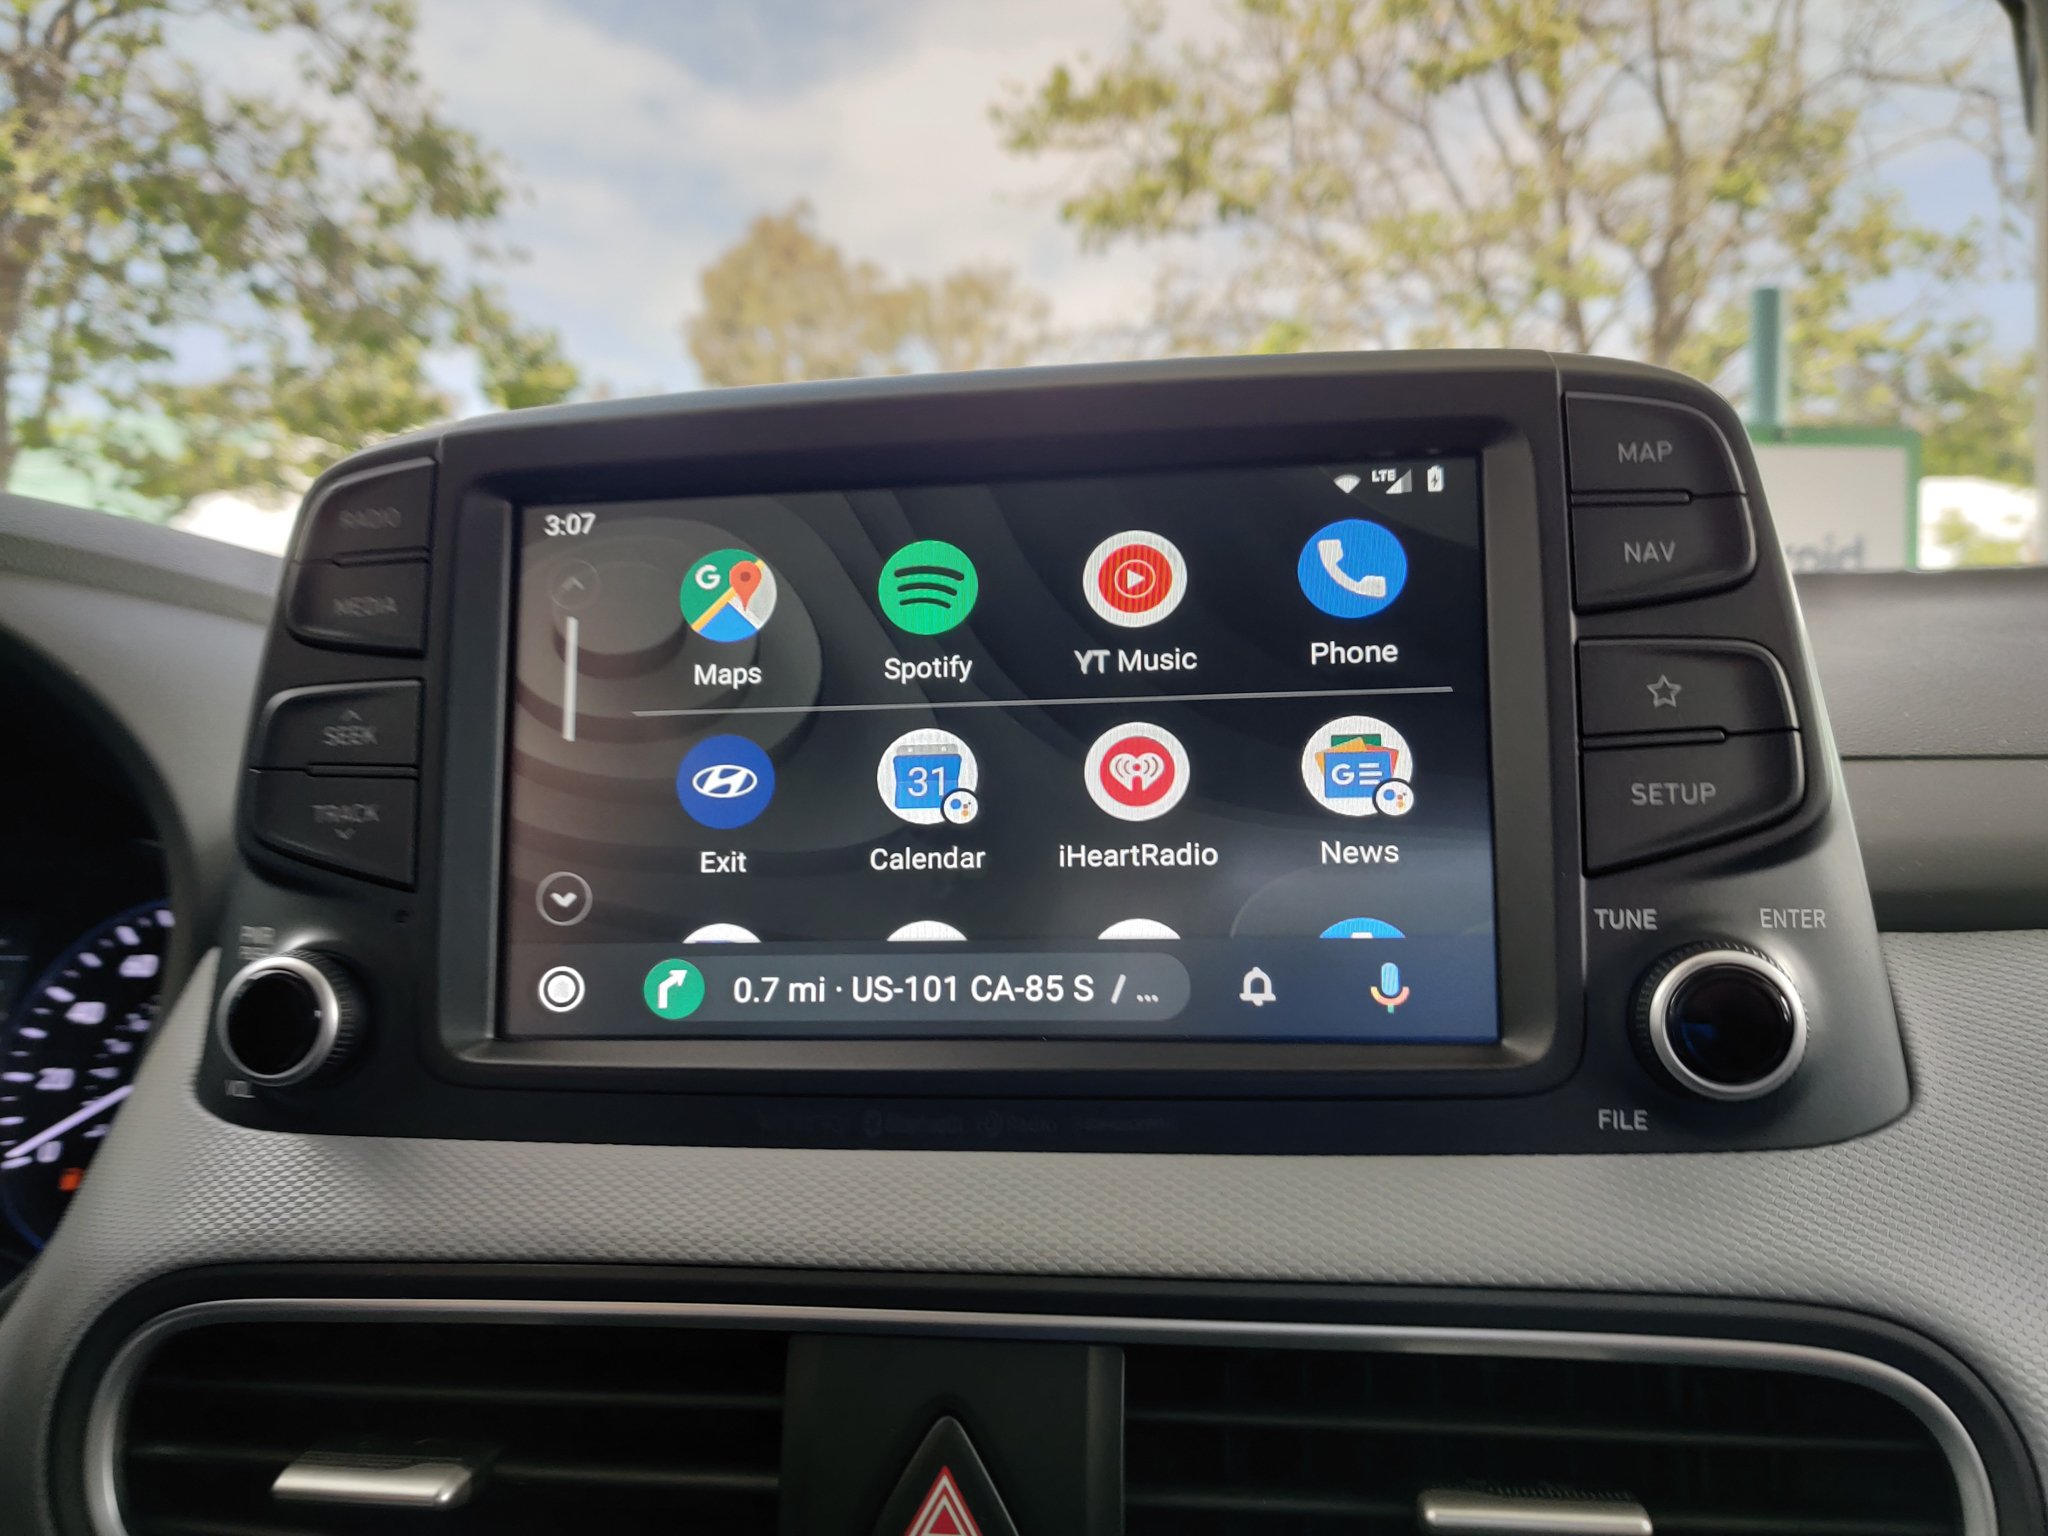 https://www.androidcentral.com/sites/androidcentral.com/files/styles/large_wm_brw/public/field/image/2019/05/new-android-auto7-u5vz.jpg?itok=fs2VNPC2